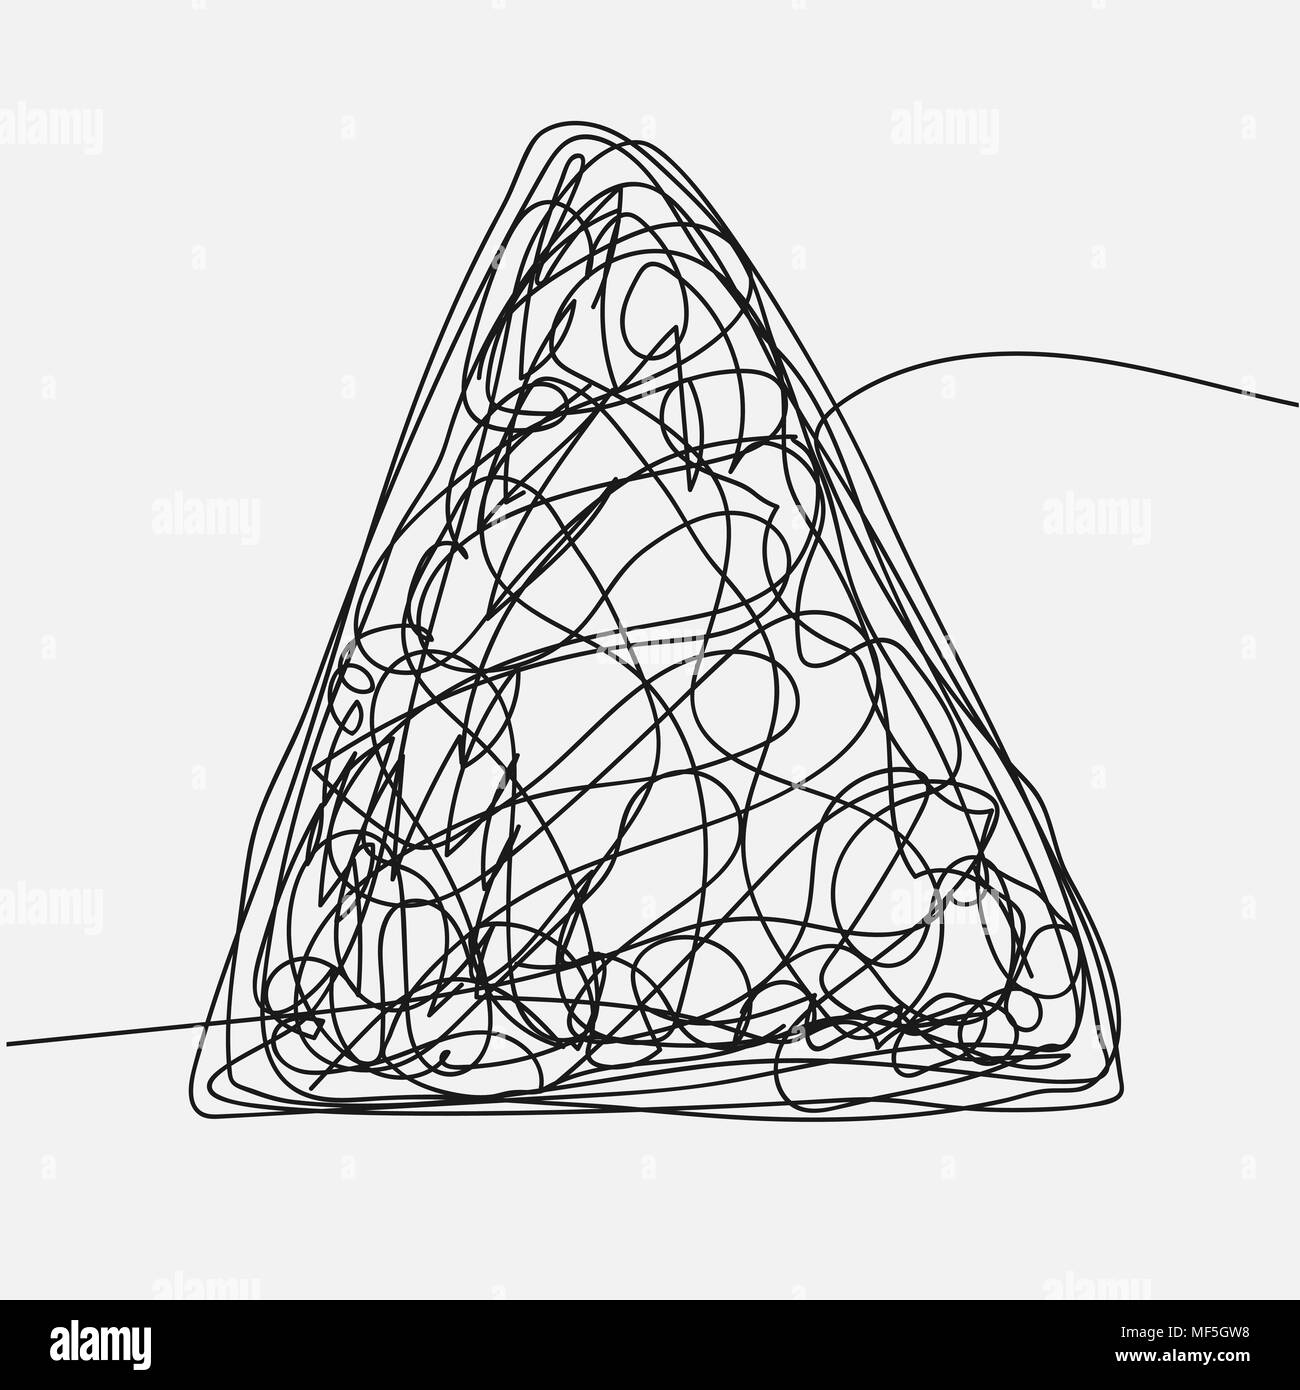 Tangle Scrawl Sketch Vector. Drawing Triangle. Hand Drawn Line. Chaos. Illustration Stock Vector